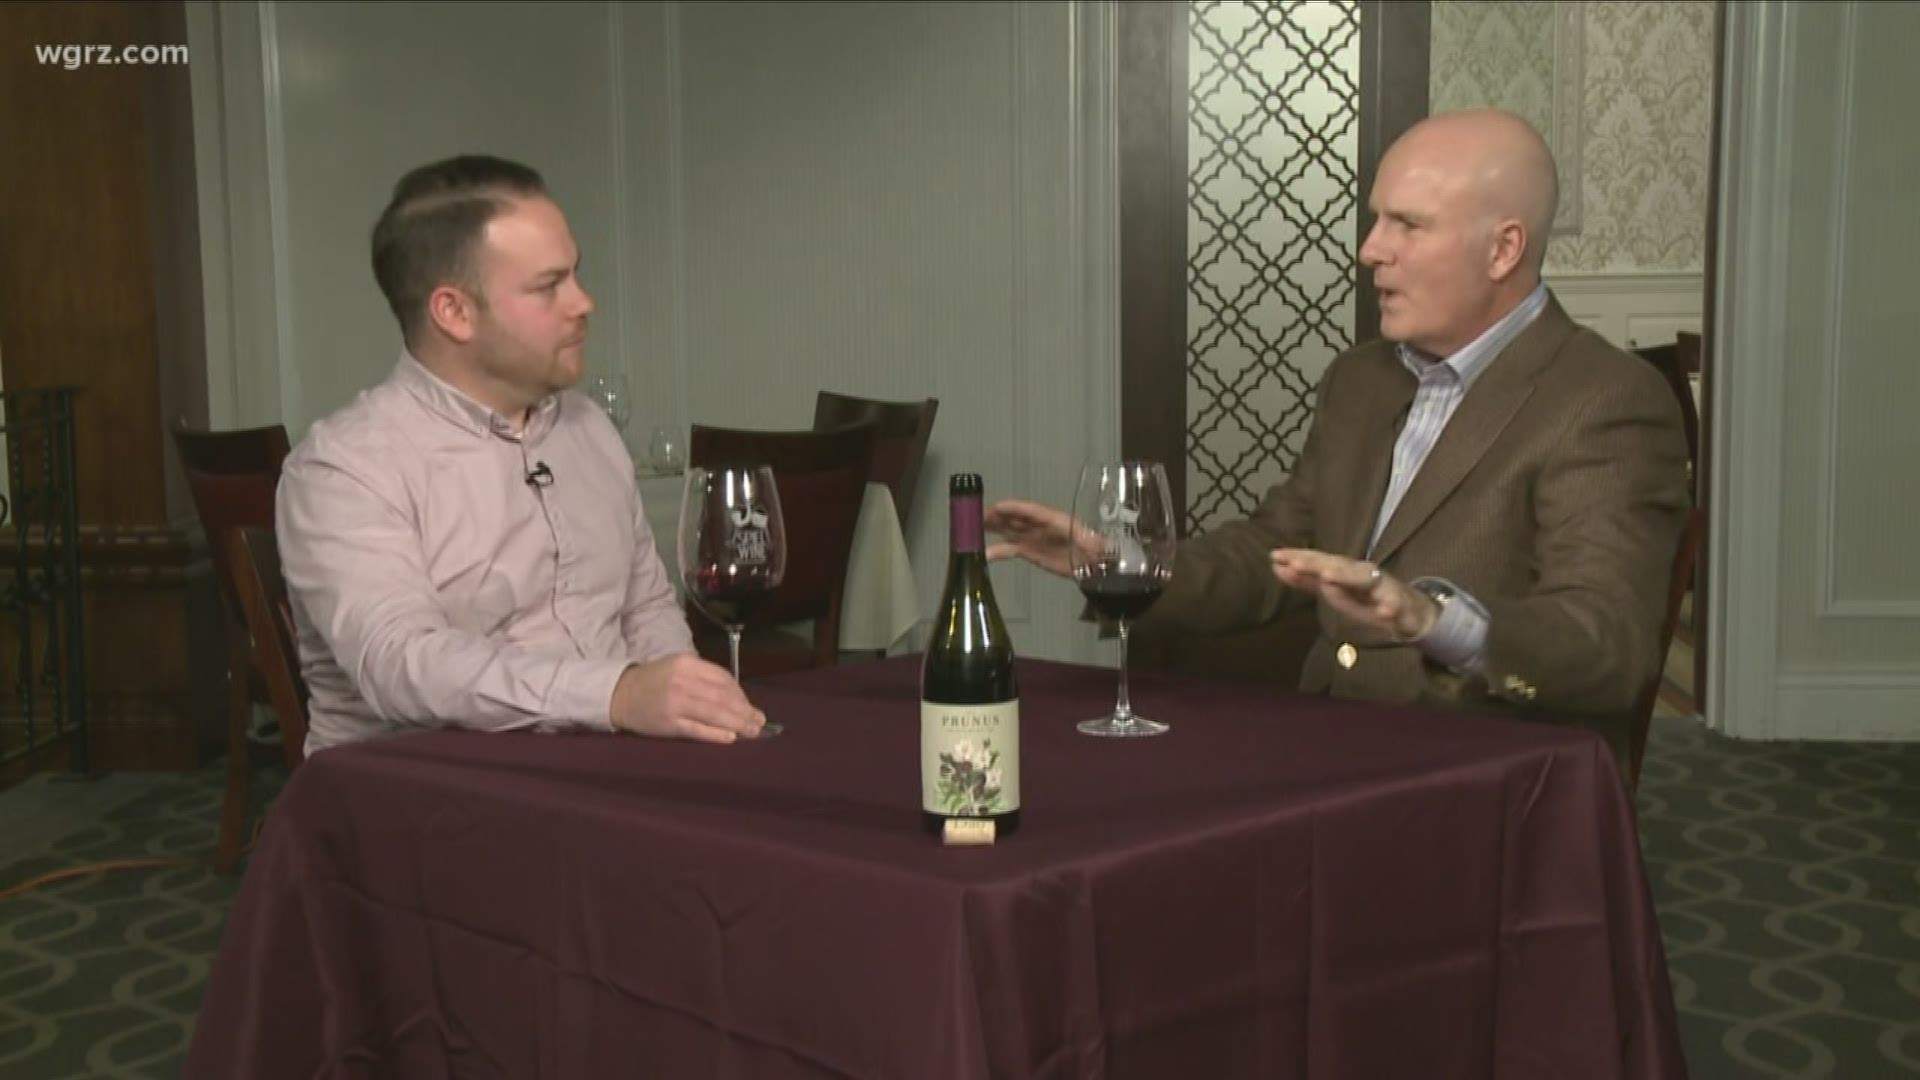 Spiel The Wine - December 7 - Segment 4 (THIS VIDEO IS SPONSORED BY THE GLOBAL GROUP)